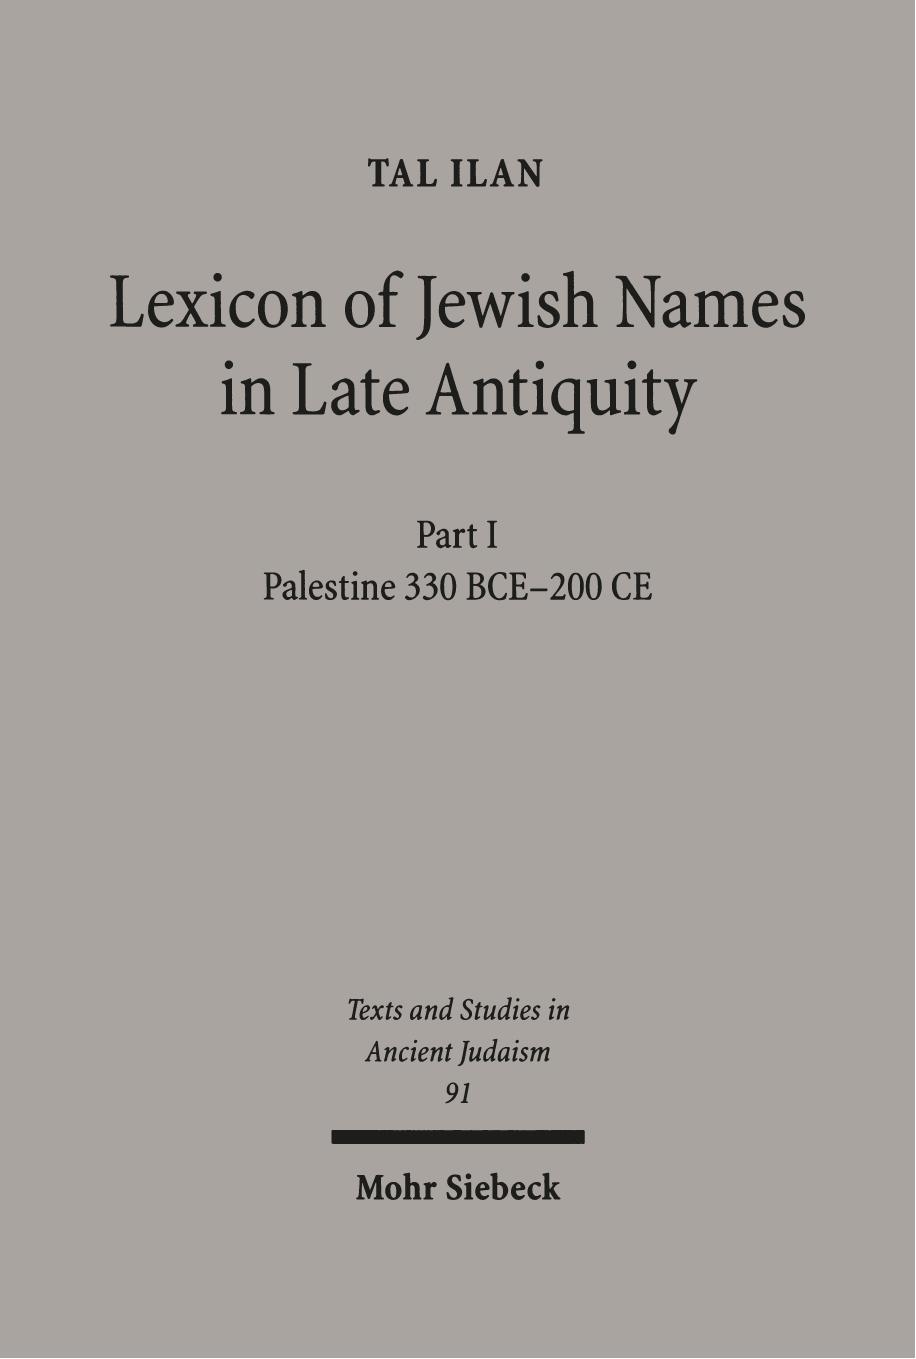 Lexicon of Jewish Names in Late Antiquity: Palestine 330 BCE - 200 CE by Tal Ilan